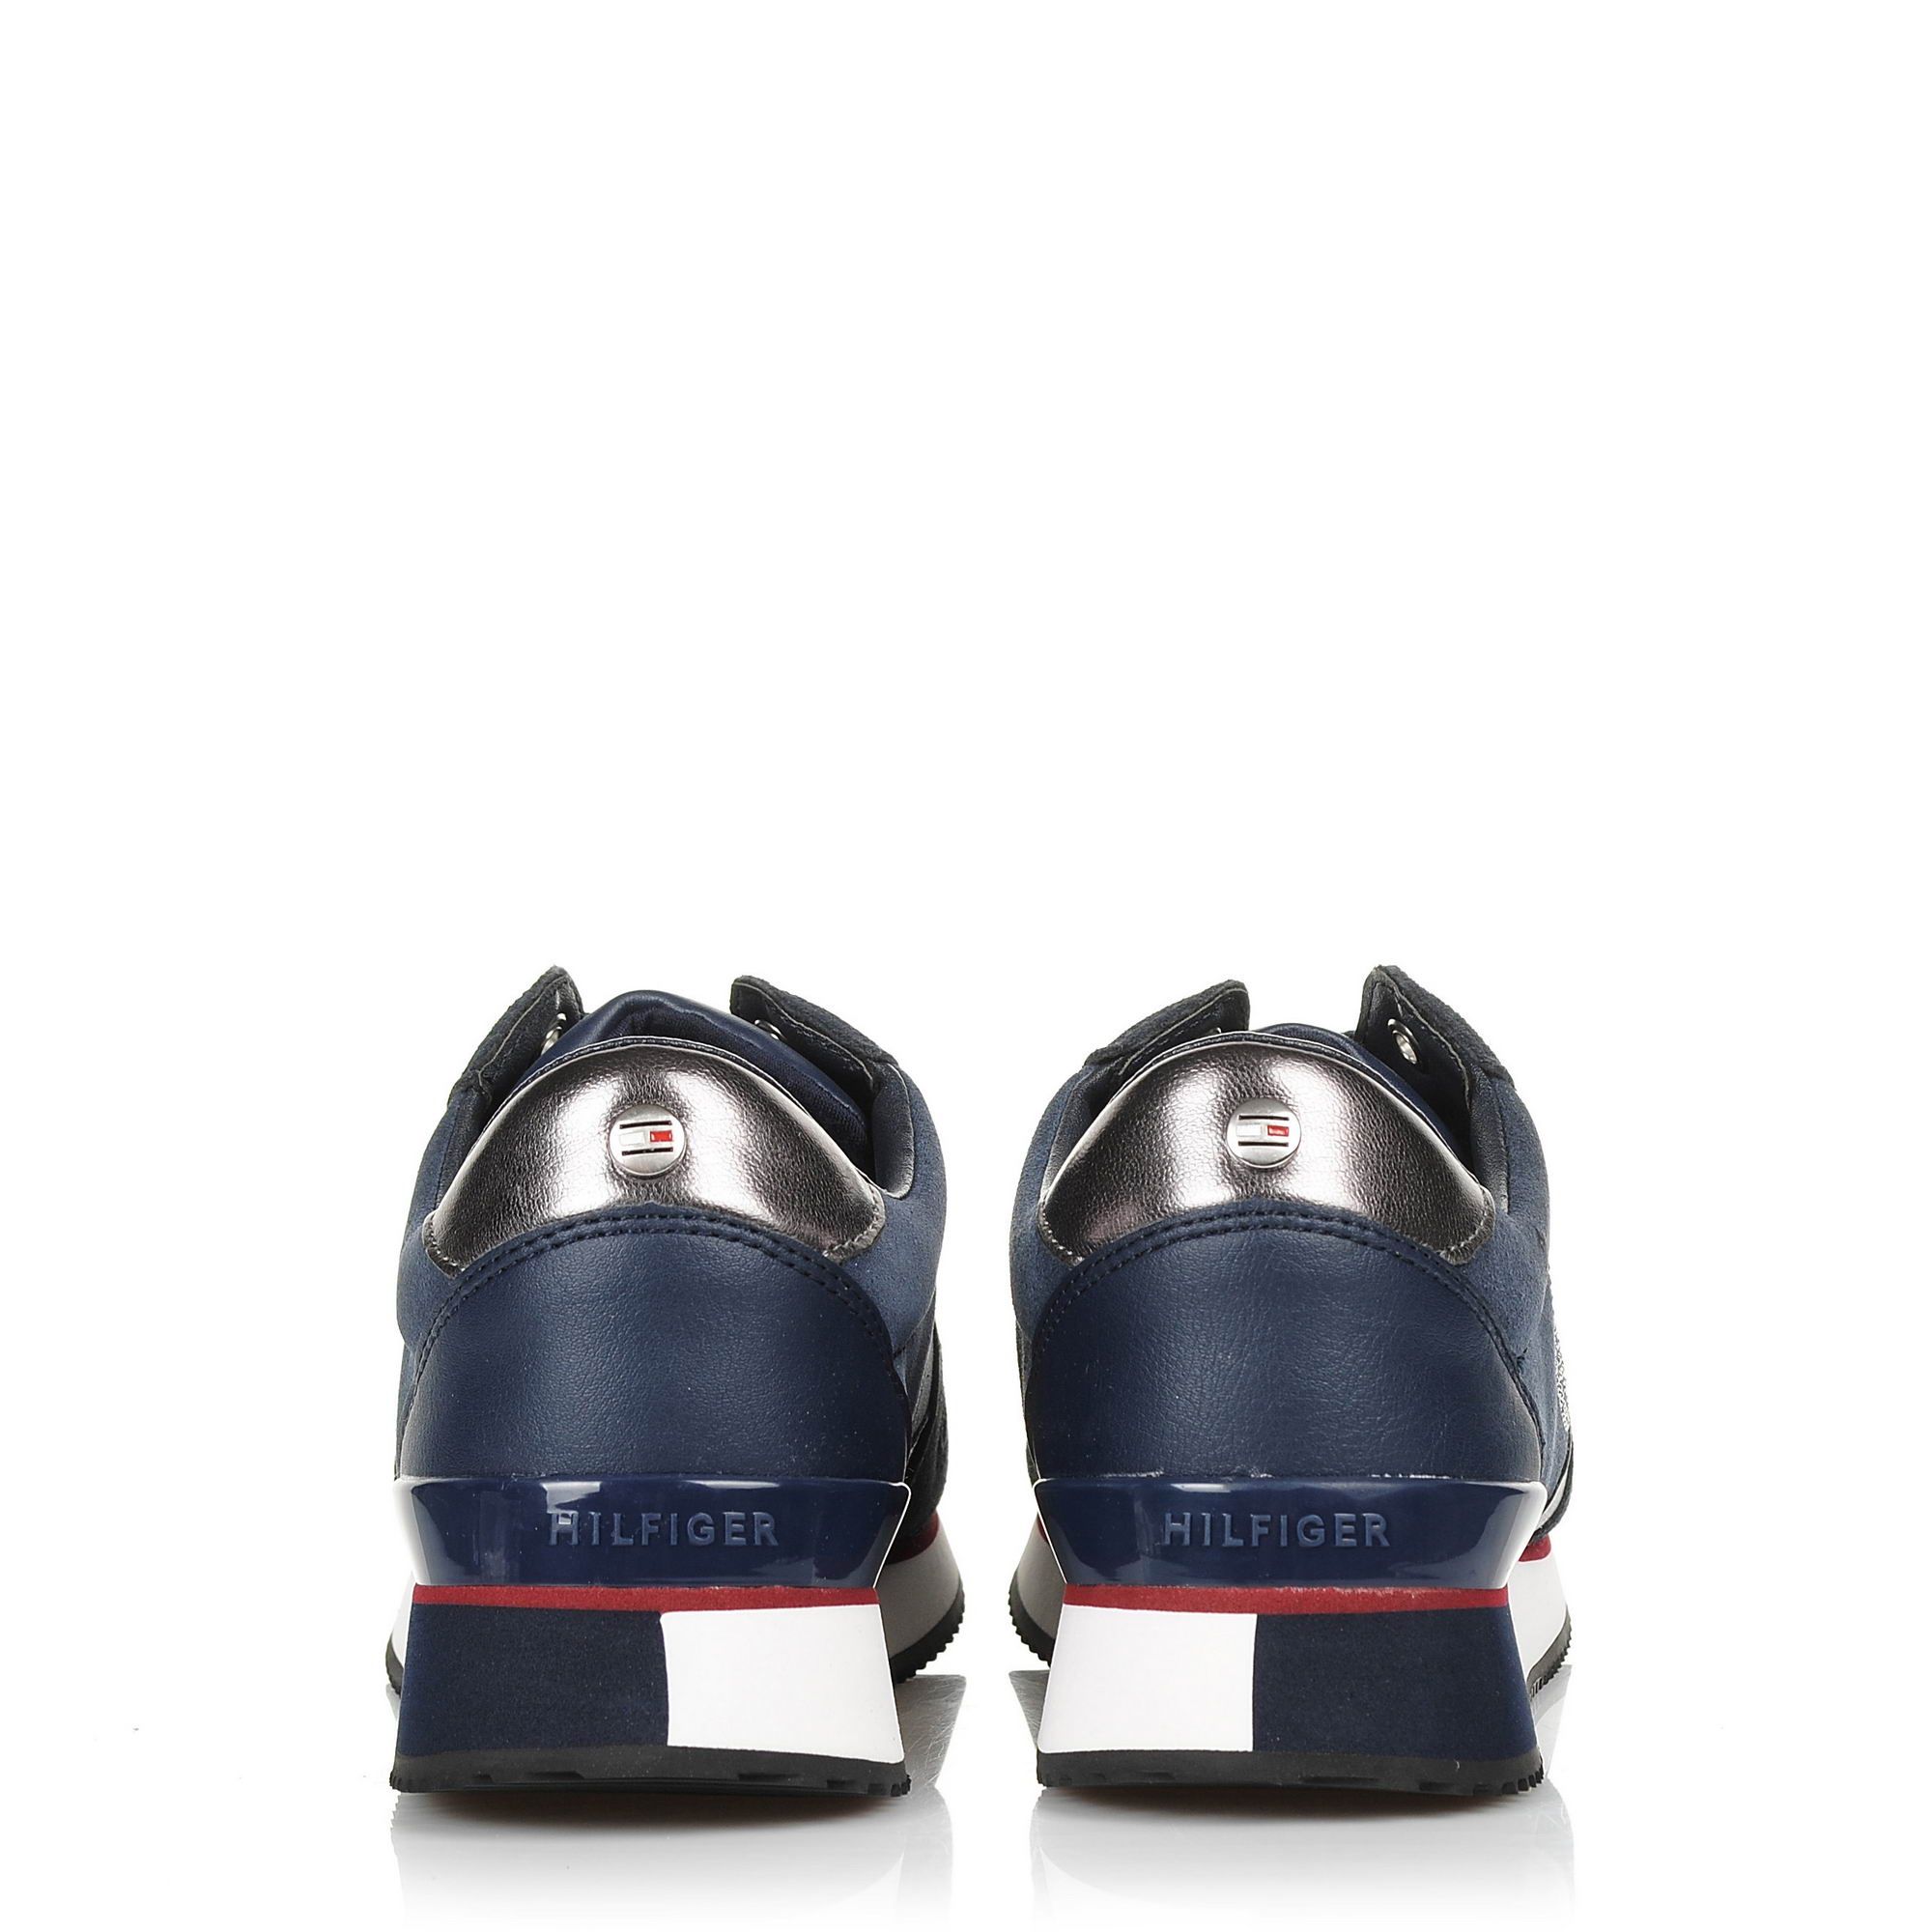 hit surround Out of breath Sneakers Tommy Hilfiger Tommy Stud City Snea FW0FW03229 | BRANDBAGS.gr